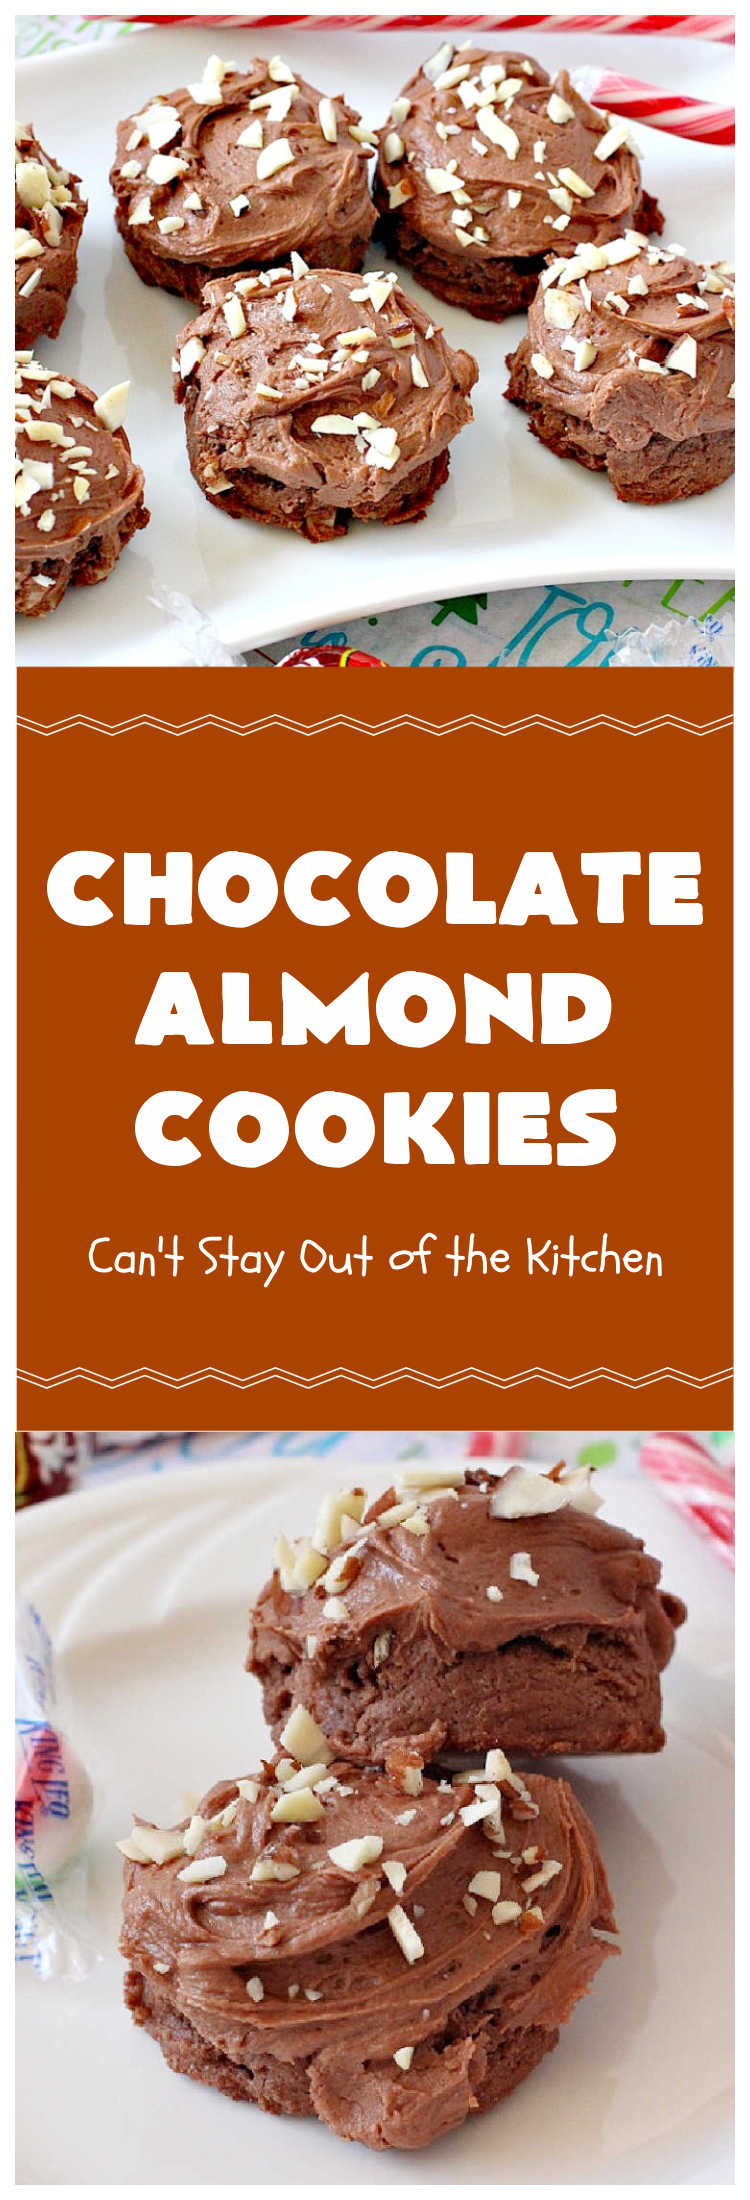 Chocolate Almond Cookies | Can't Stay Out of the Kitchen | these #cookies are divine! Heavenly combination of #chocolate & #almonds in cookie and frosting. #dessert #ChocolateDessert #ChocolateAlmondCookies #holiday #HolidayBaking